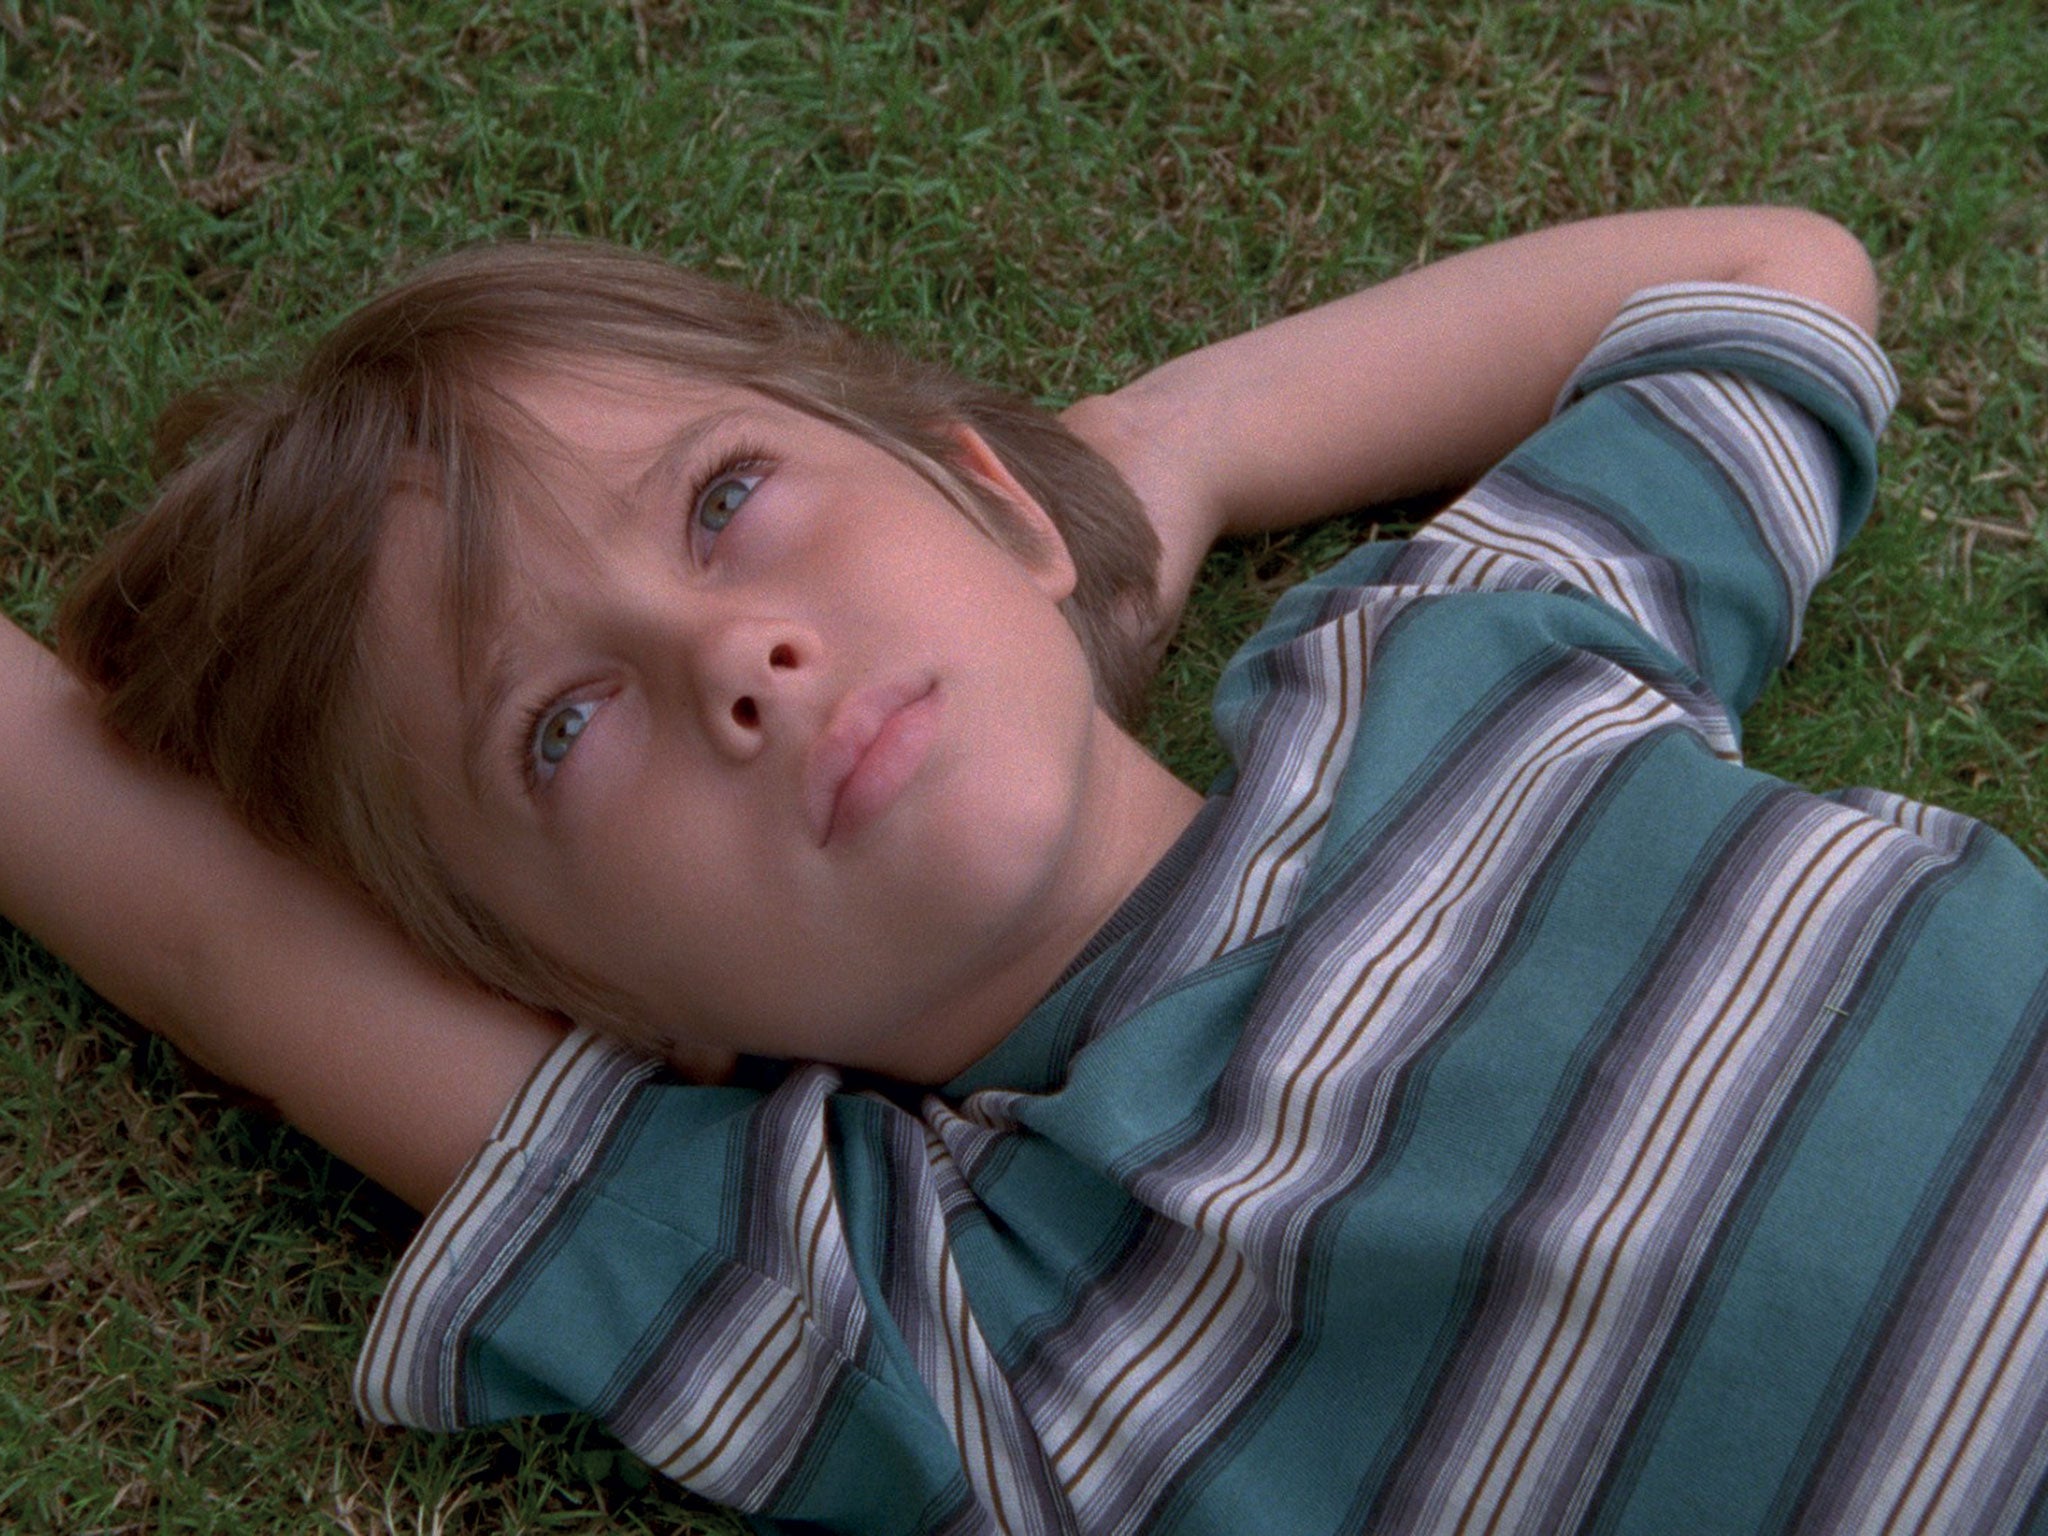 Boyhood has attracted its share of five-star reviews